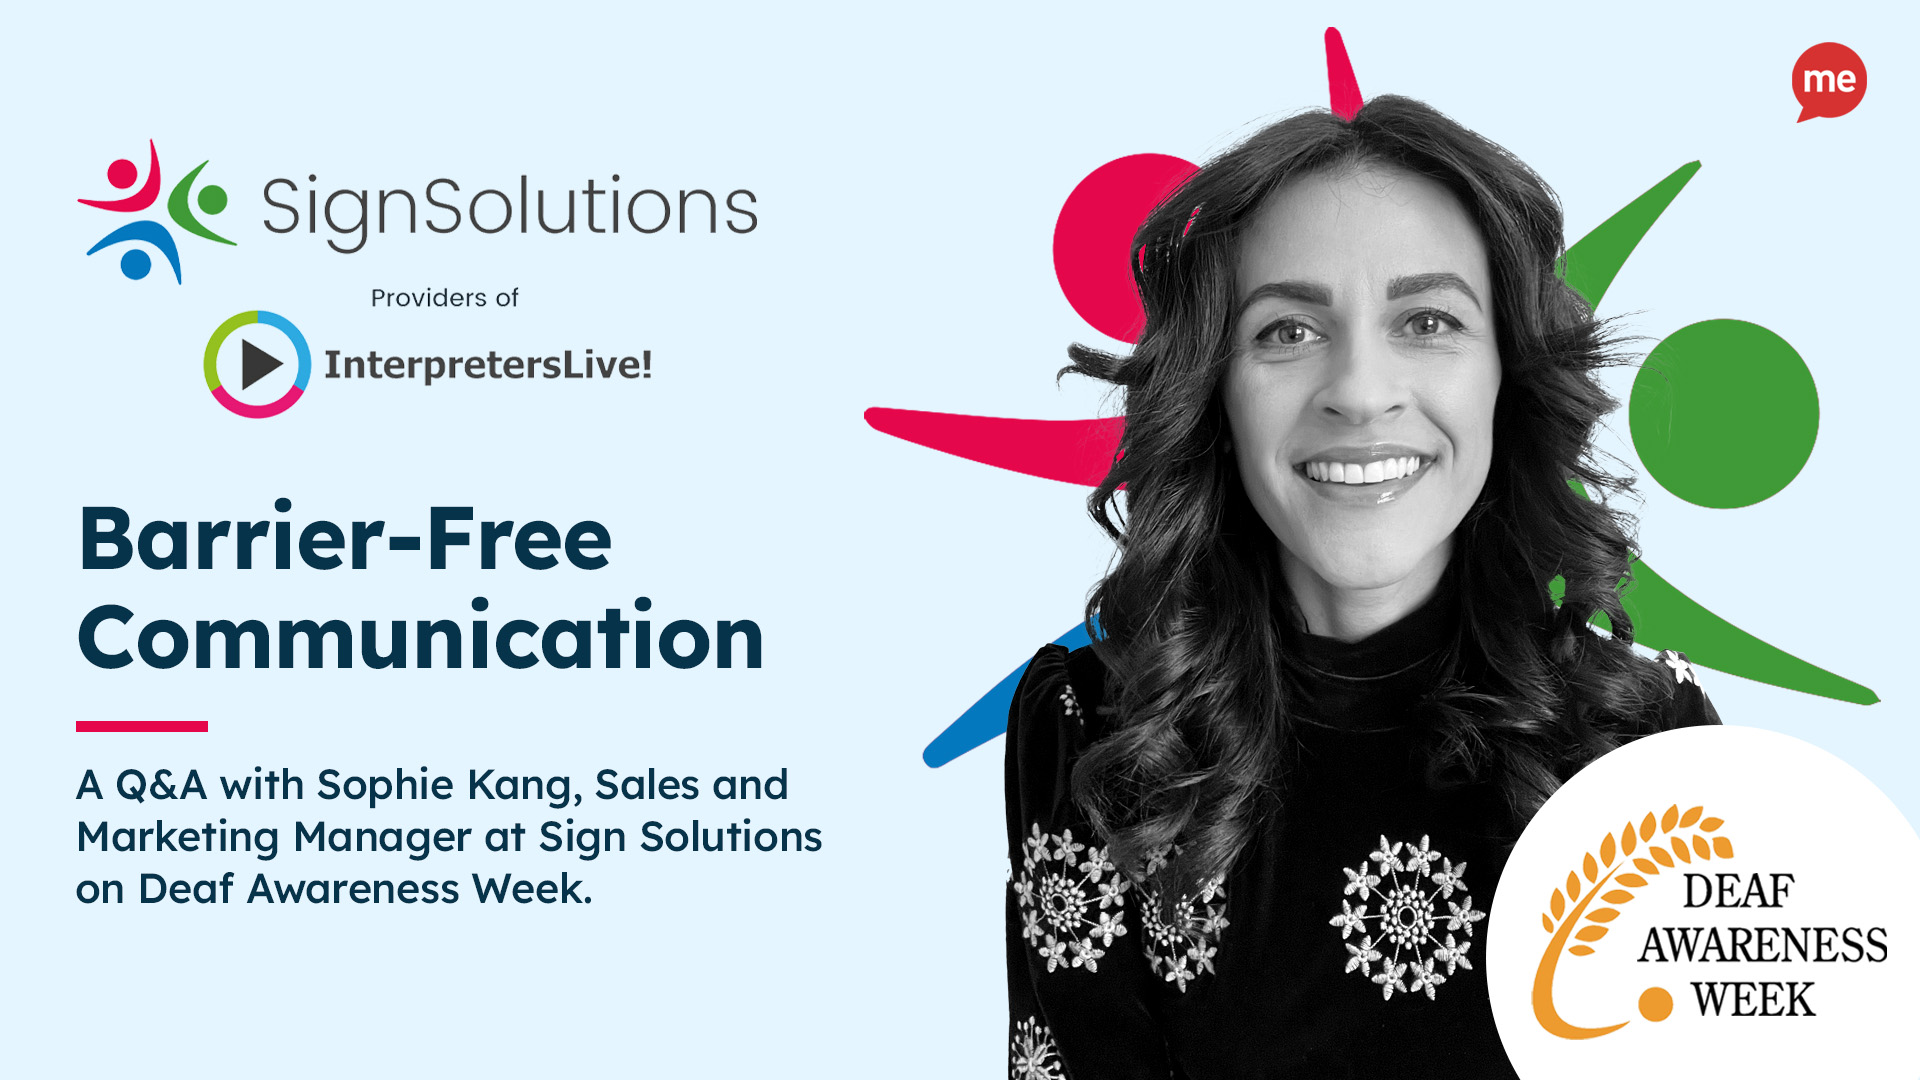 Barrier-Free Communication. A Q&A with Sophie Kang, Sales & Marketing Manager at Sign Solutions. Headshot of Sophie